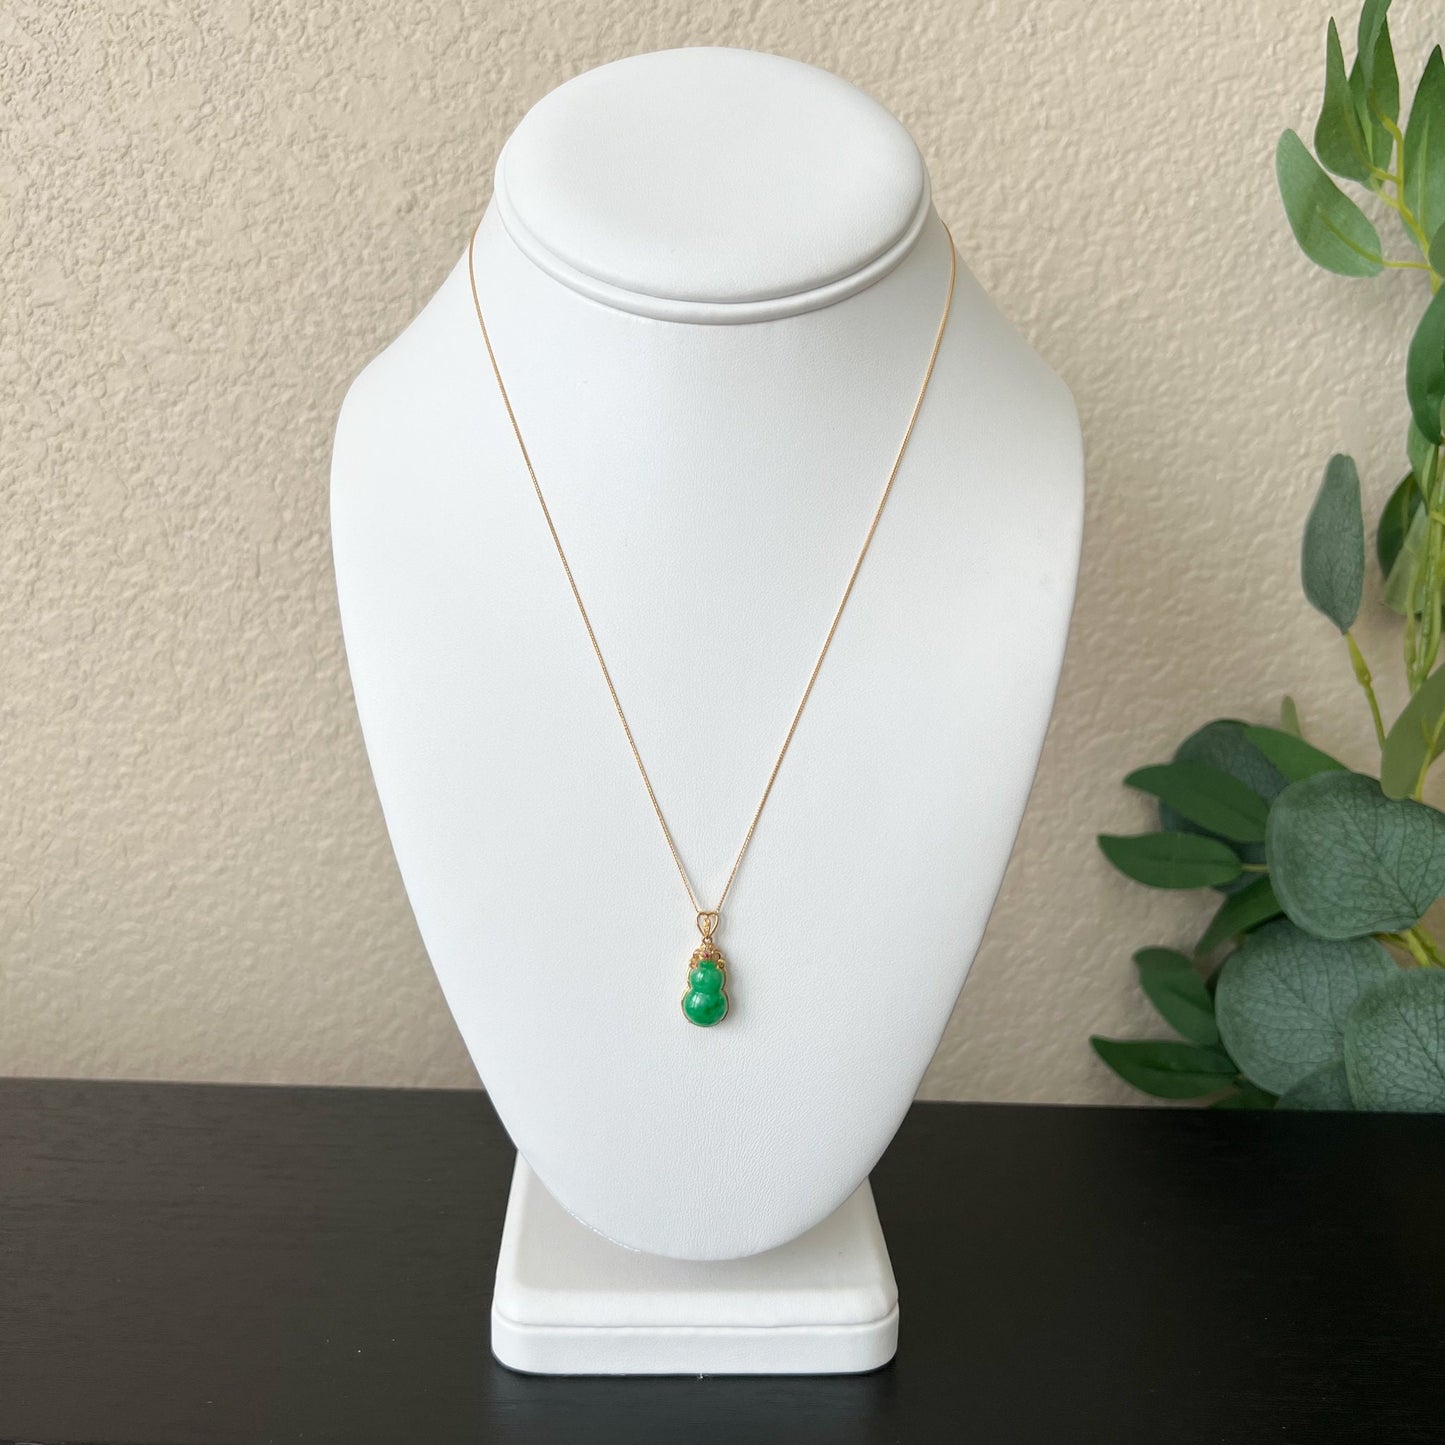 Jade Bottle Gourd, Jadeite Jade, 18K Gold Set, Calabash, Small and Dainty, Hand Carved Pendant Necklace, FSX-0921-1647126338 - AriaDesignCollection